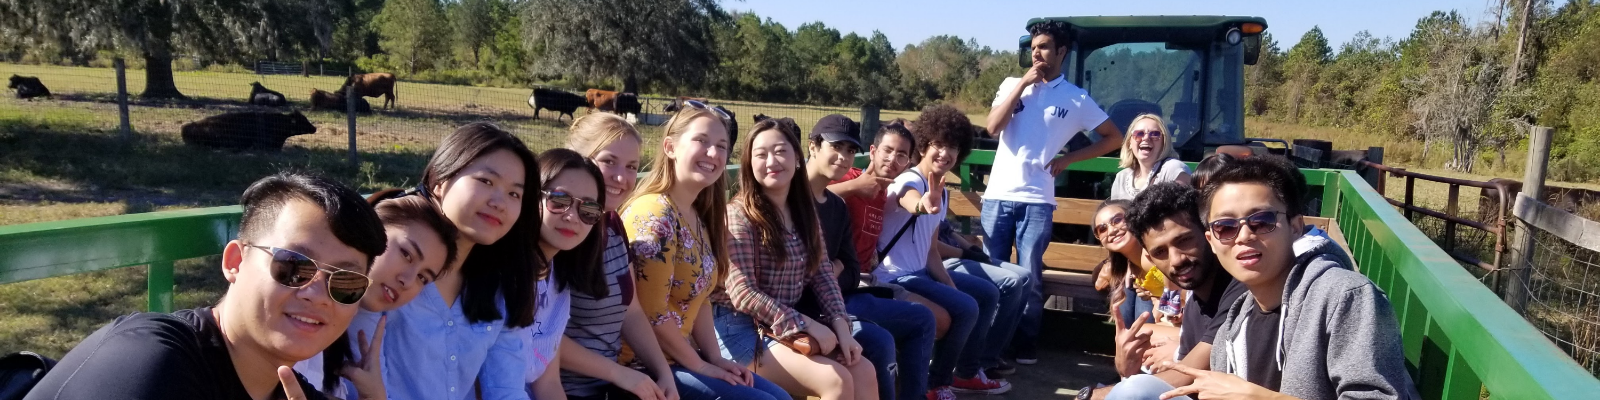 Students on field trip smiling